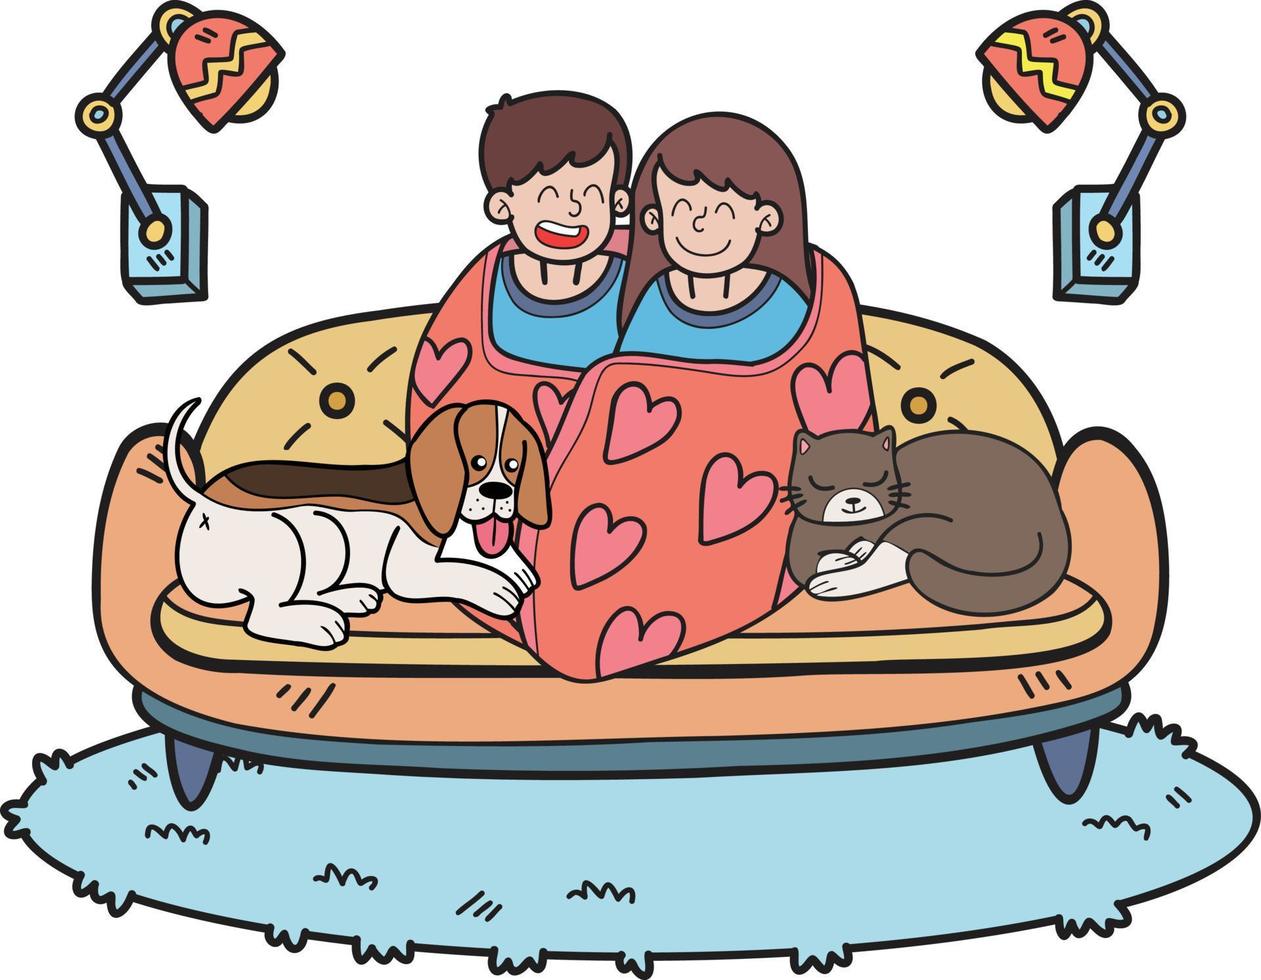 Hand Drawn owners are watching movies in blankets with dogs and cats illustration in doodle style vector